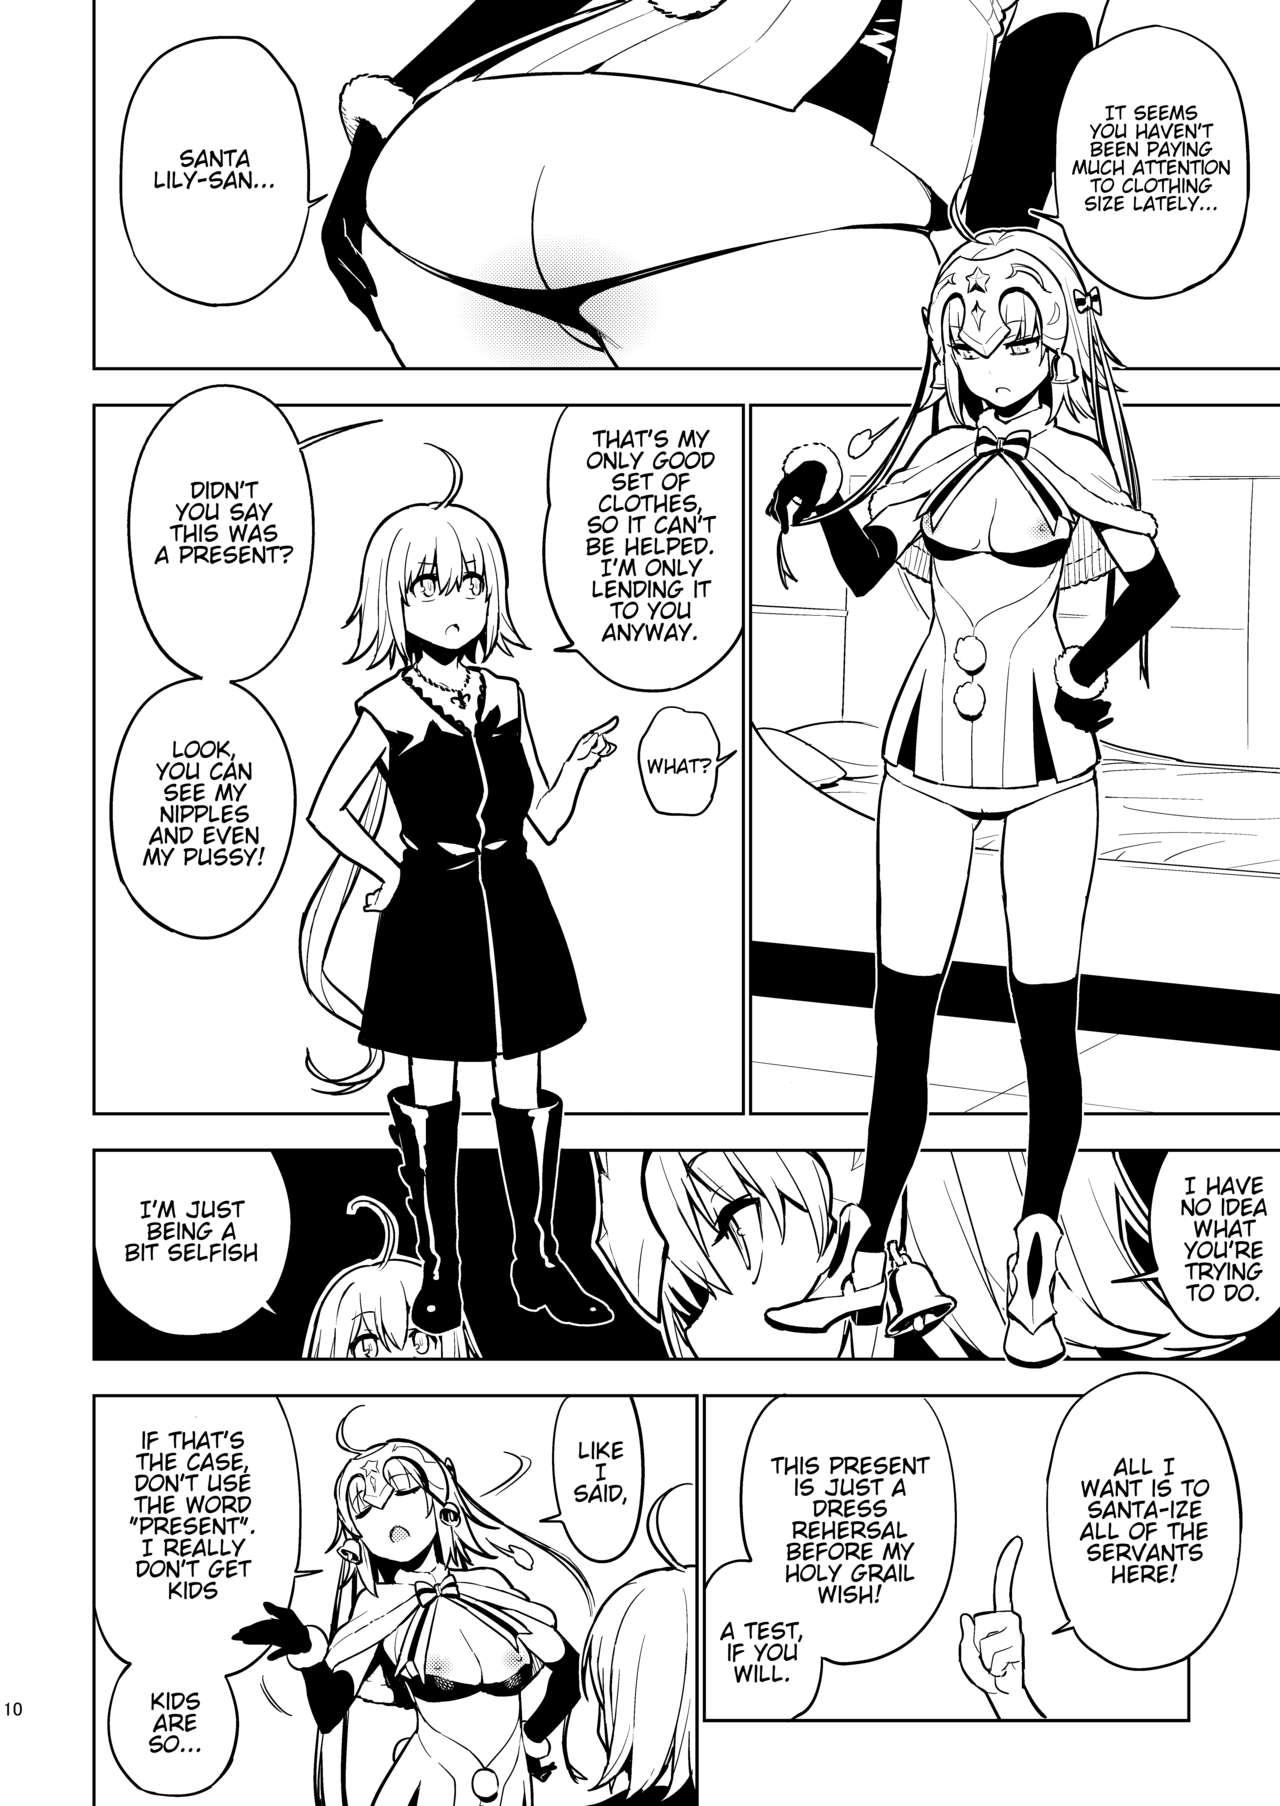 Danish SO BORED - Fate grand order Gaysex - Page 8